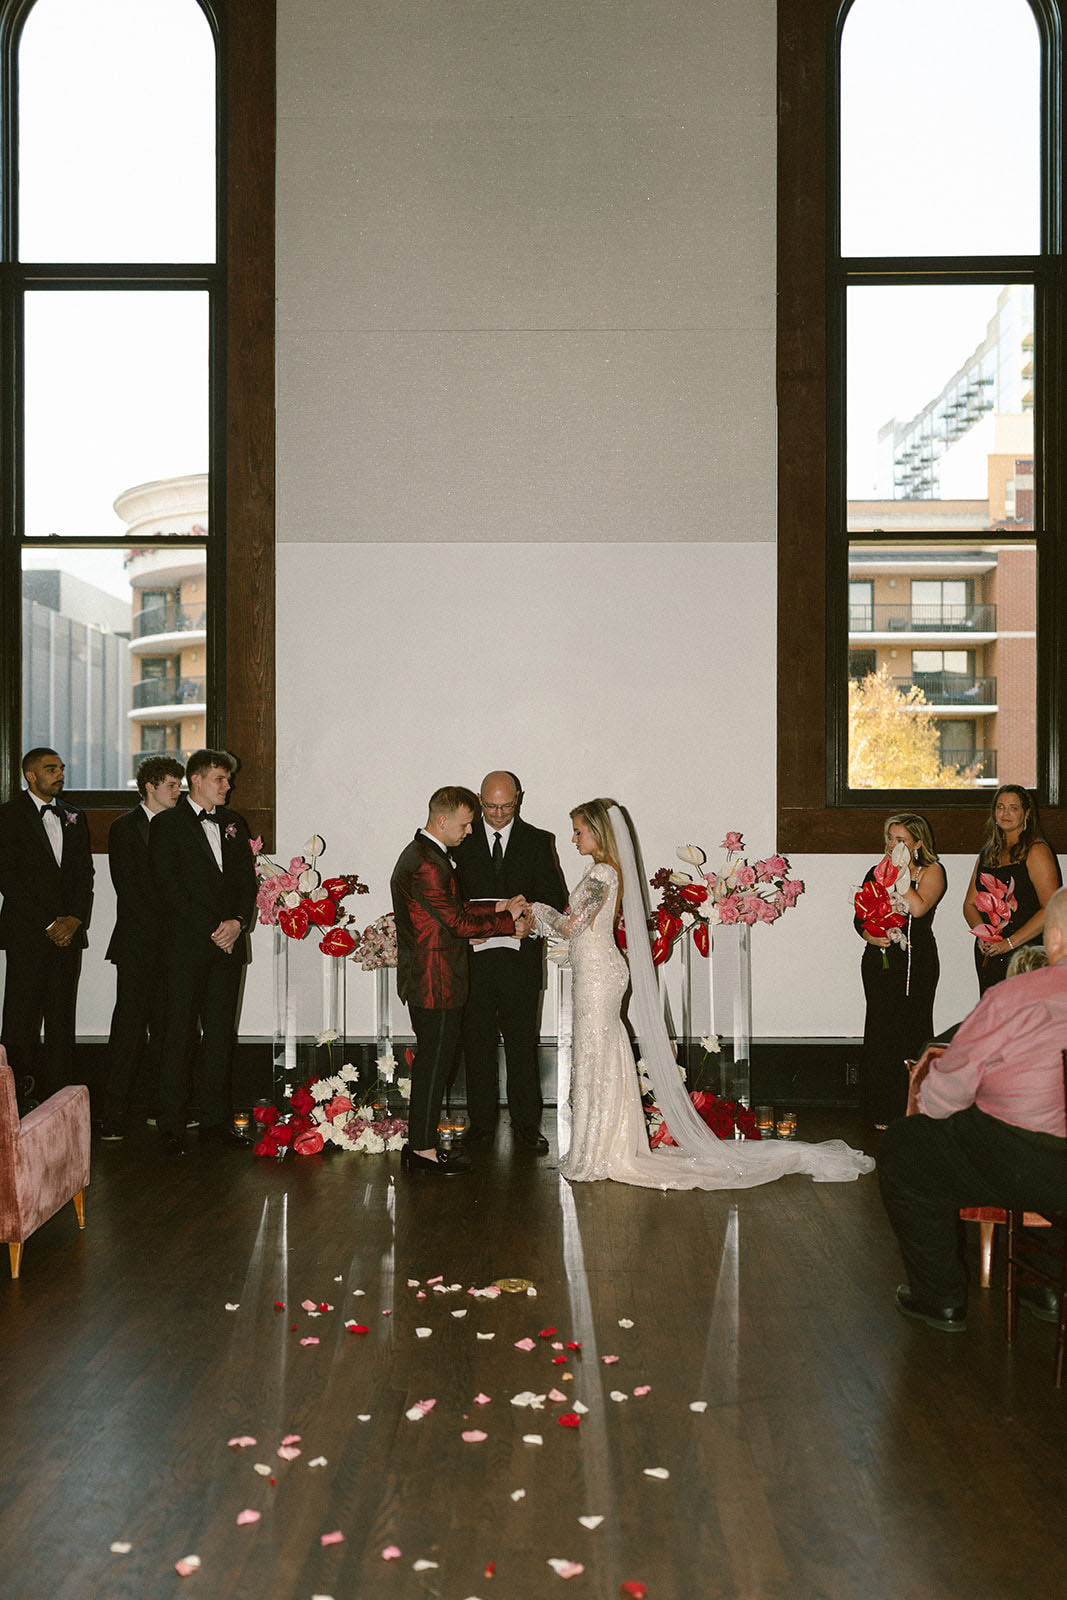 Retro Wedding Ceremony at The Bell Tower